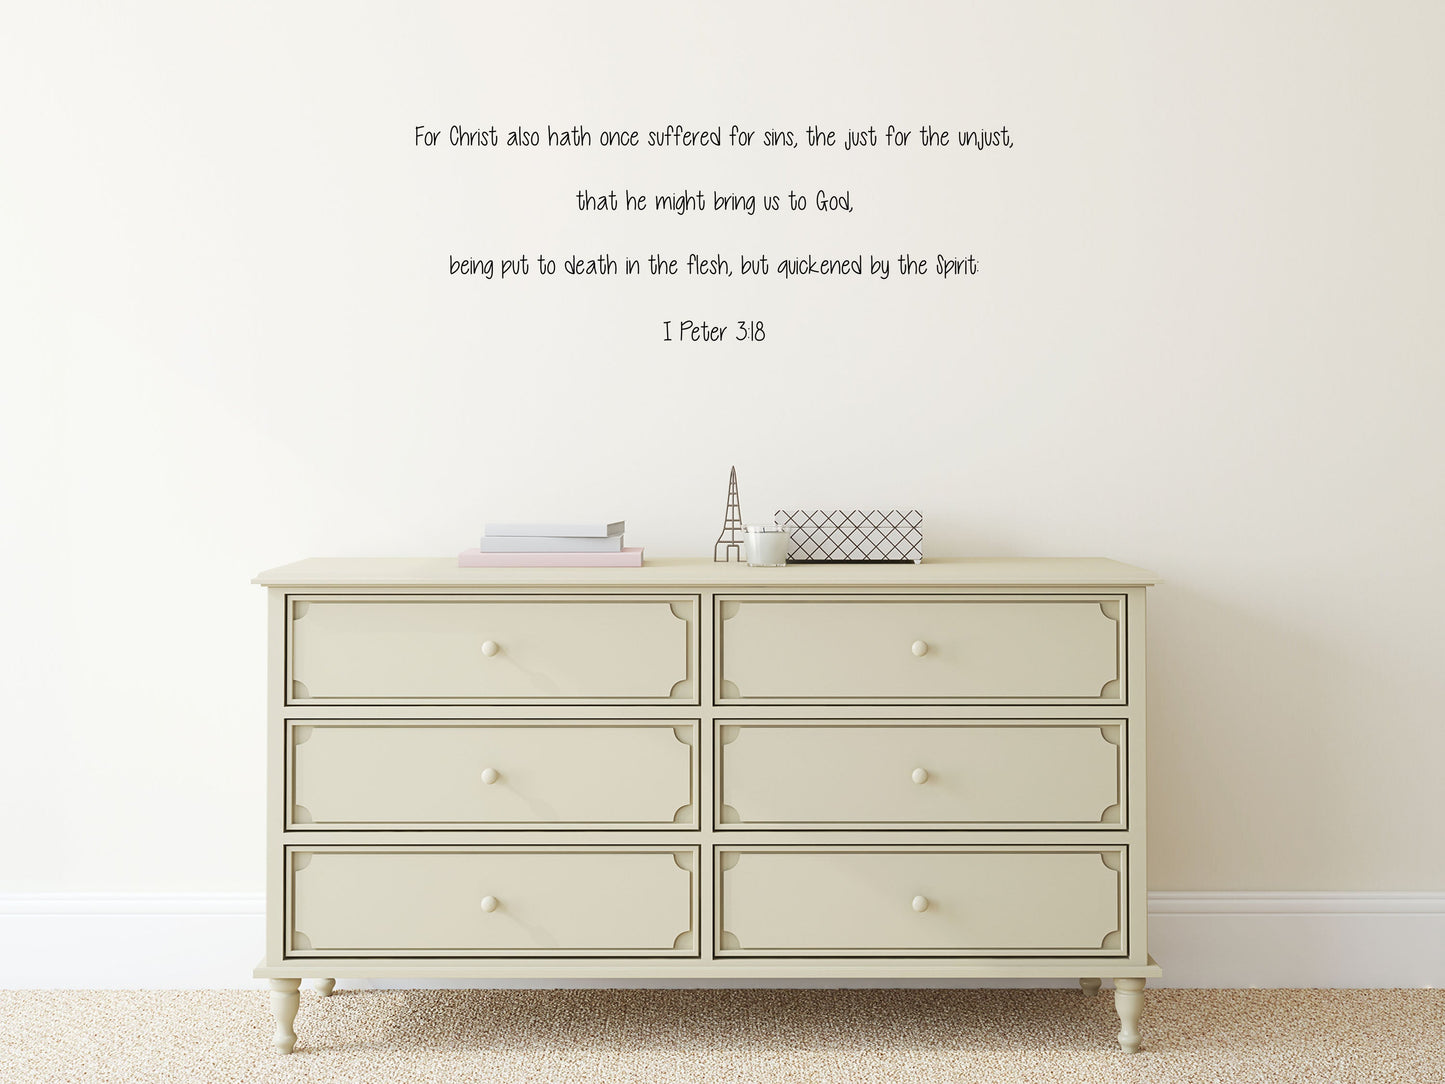 For Christ Also Hath Once Suffered 1 Peter 3:18 - Bible Verse Wall Decals Vinyl Wall Decal Title Done 